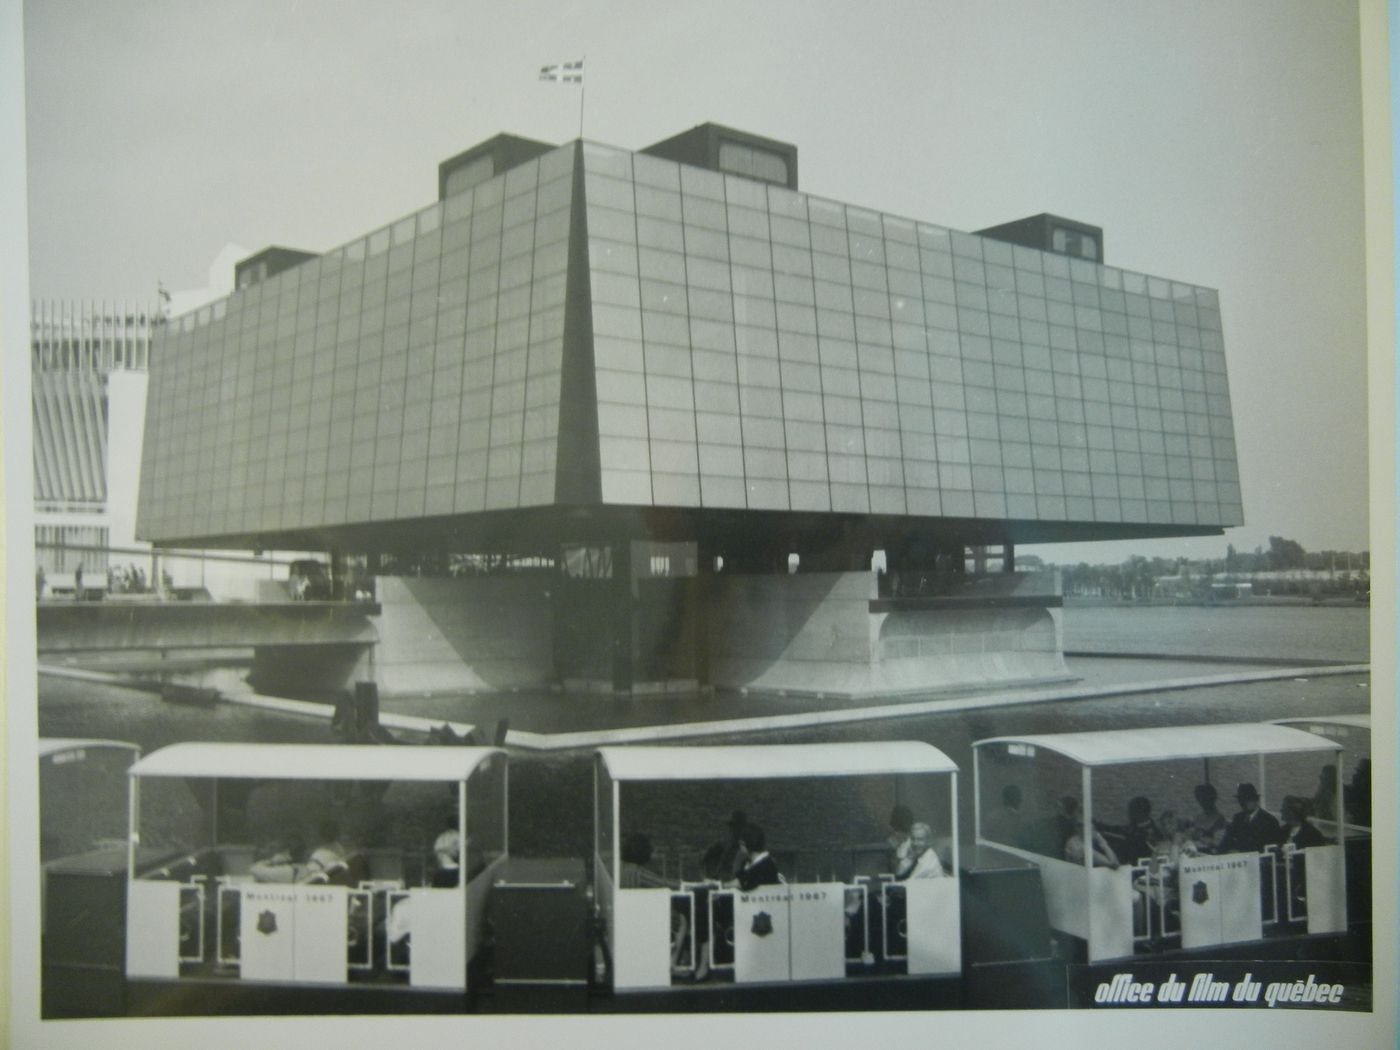 View of the Province of Quebec Pavilion with the minirail in foreground, Expo 67, Montréal, Québec